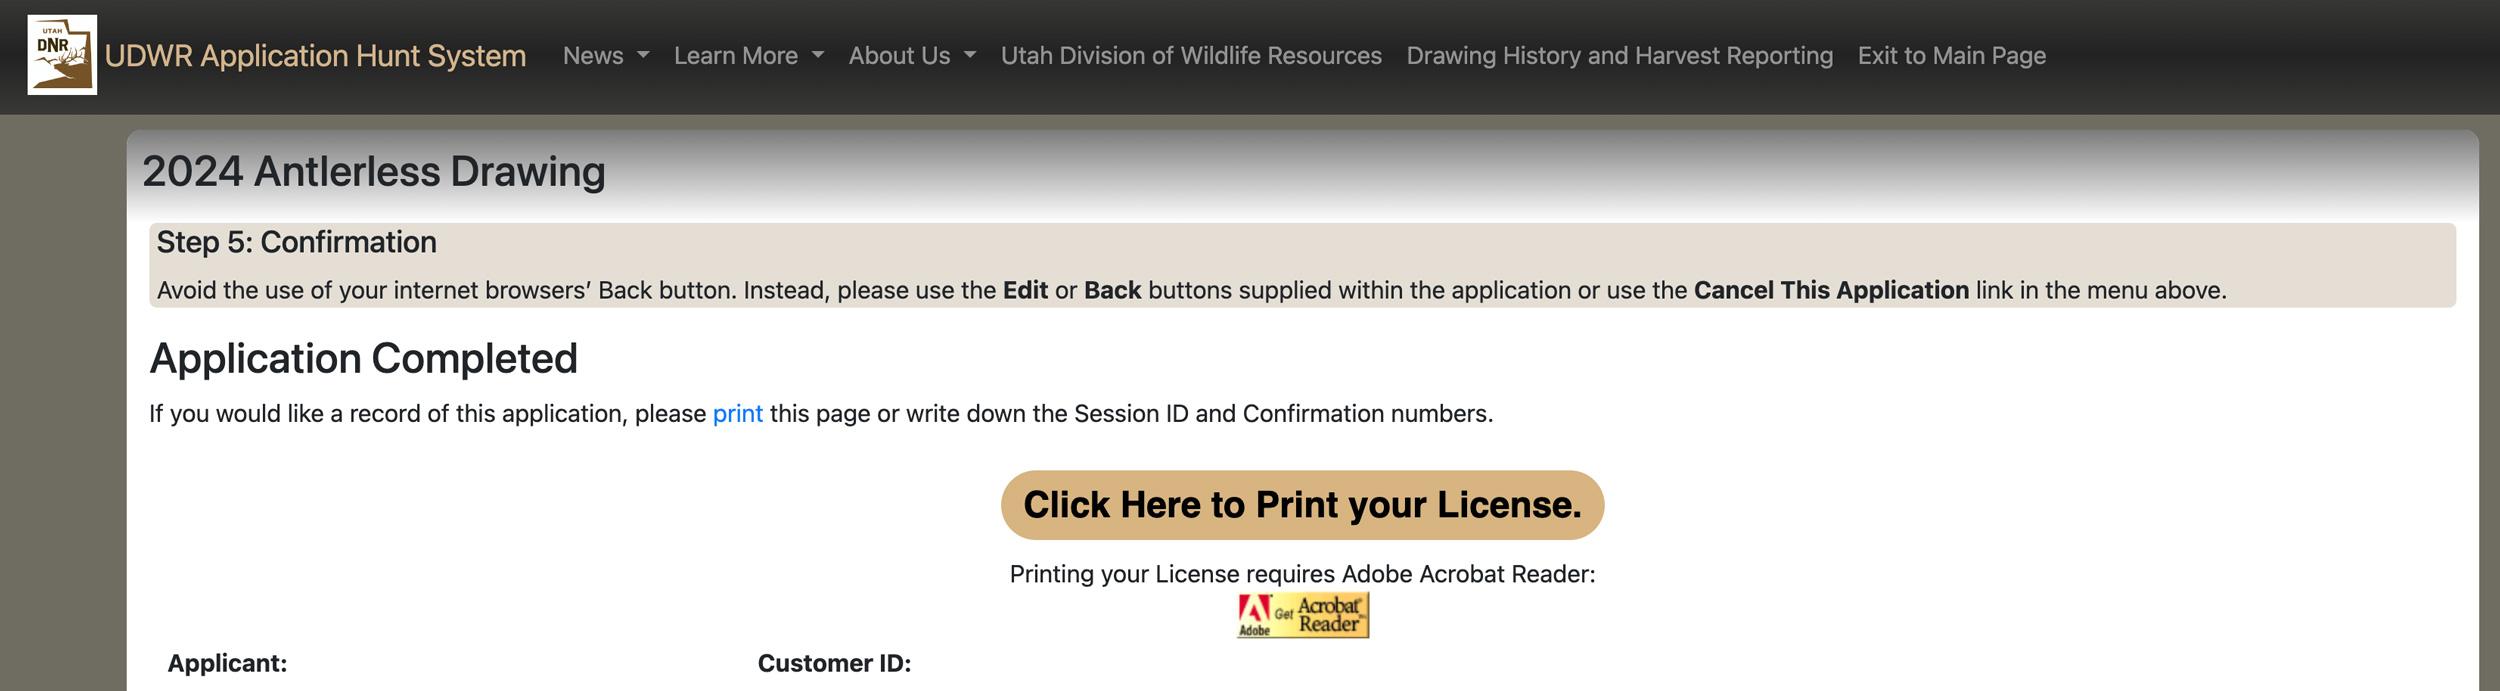 Utah confirmation page for bonus points and preference point purchase